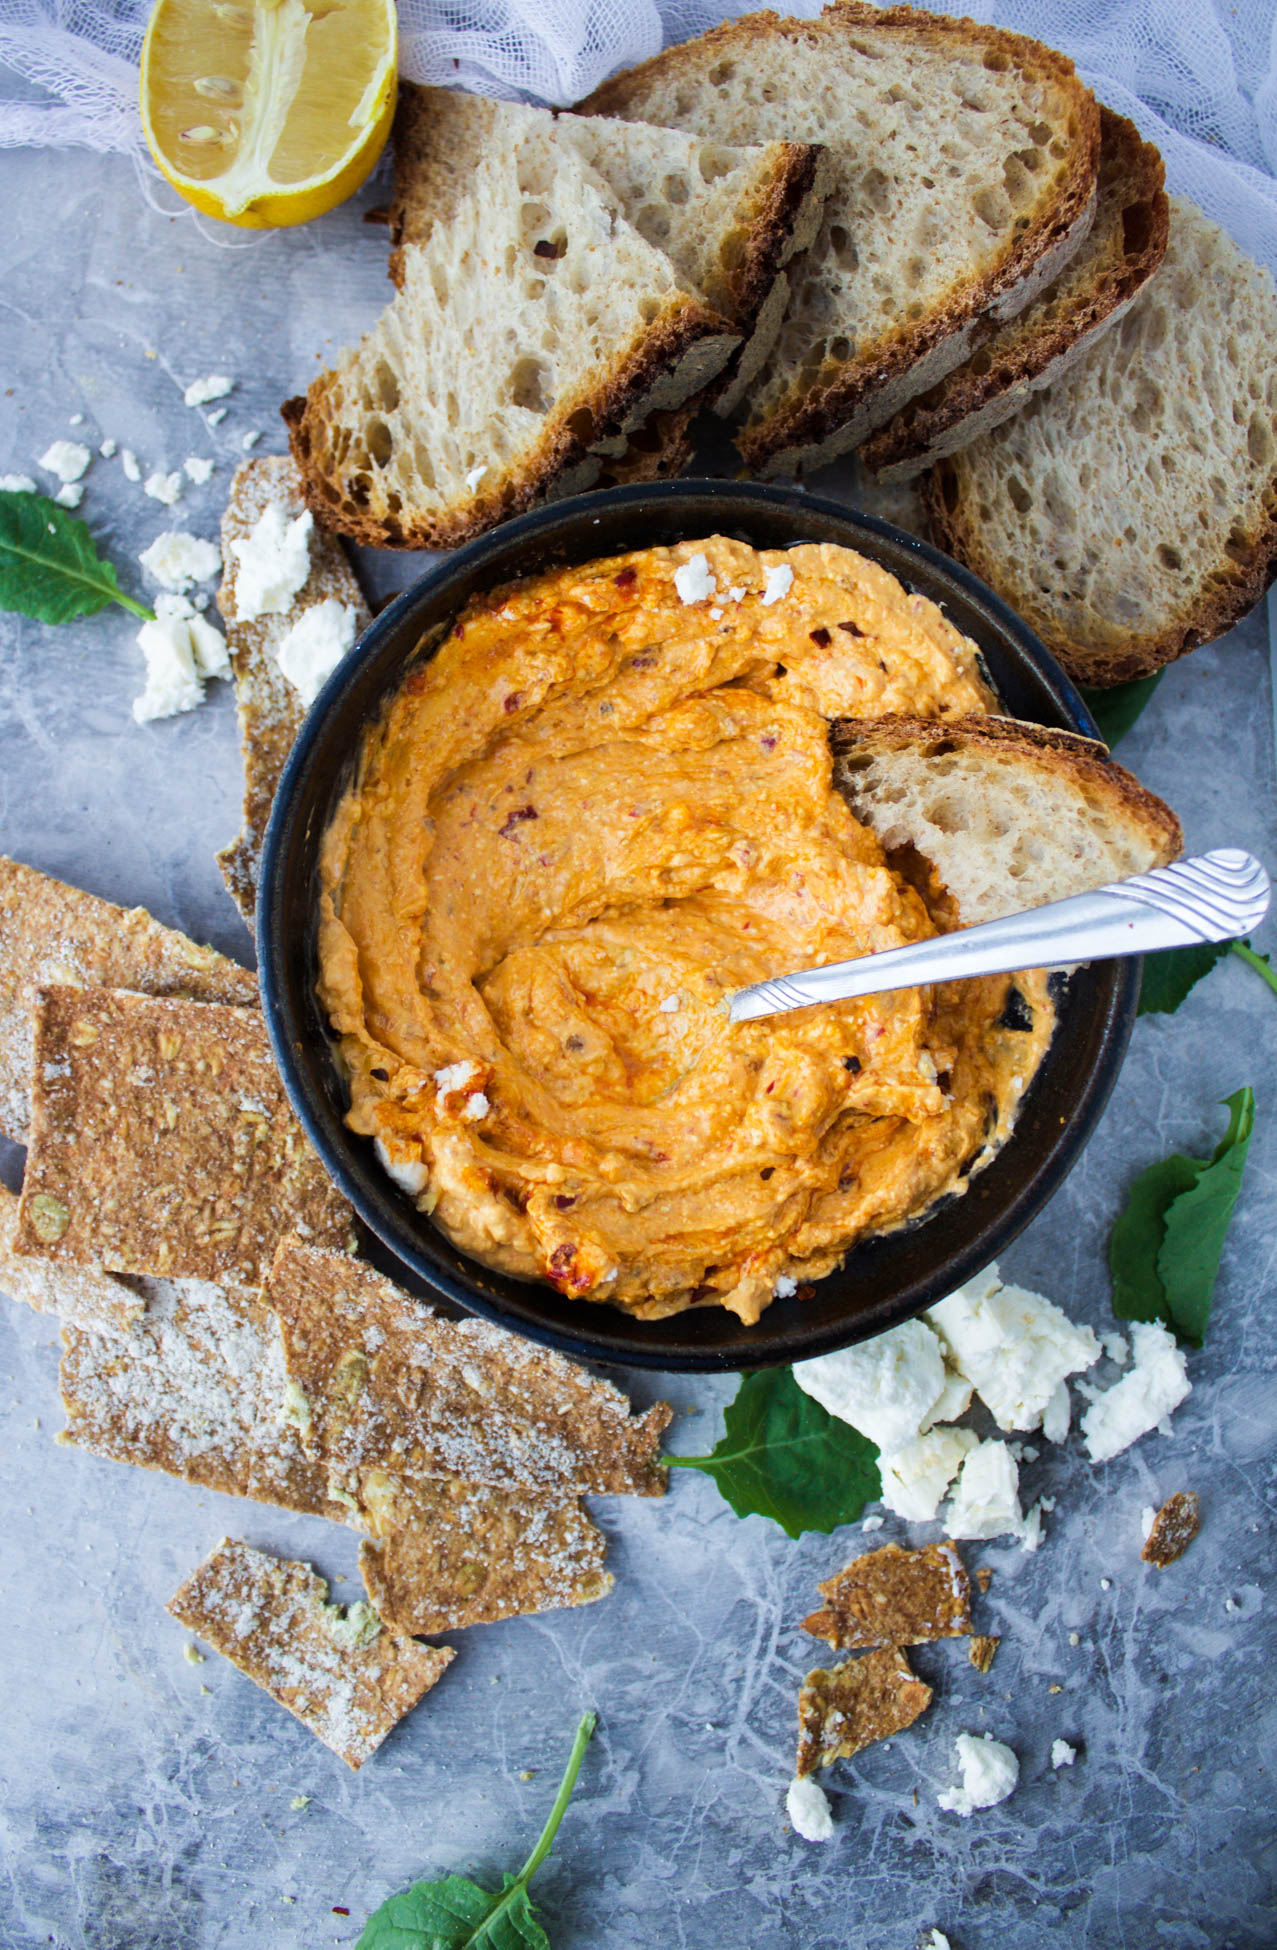 Harissa-Spiked Whipped Feta Dip